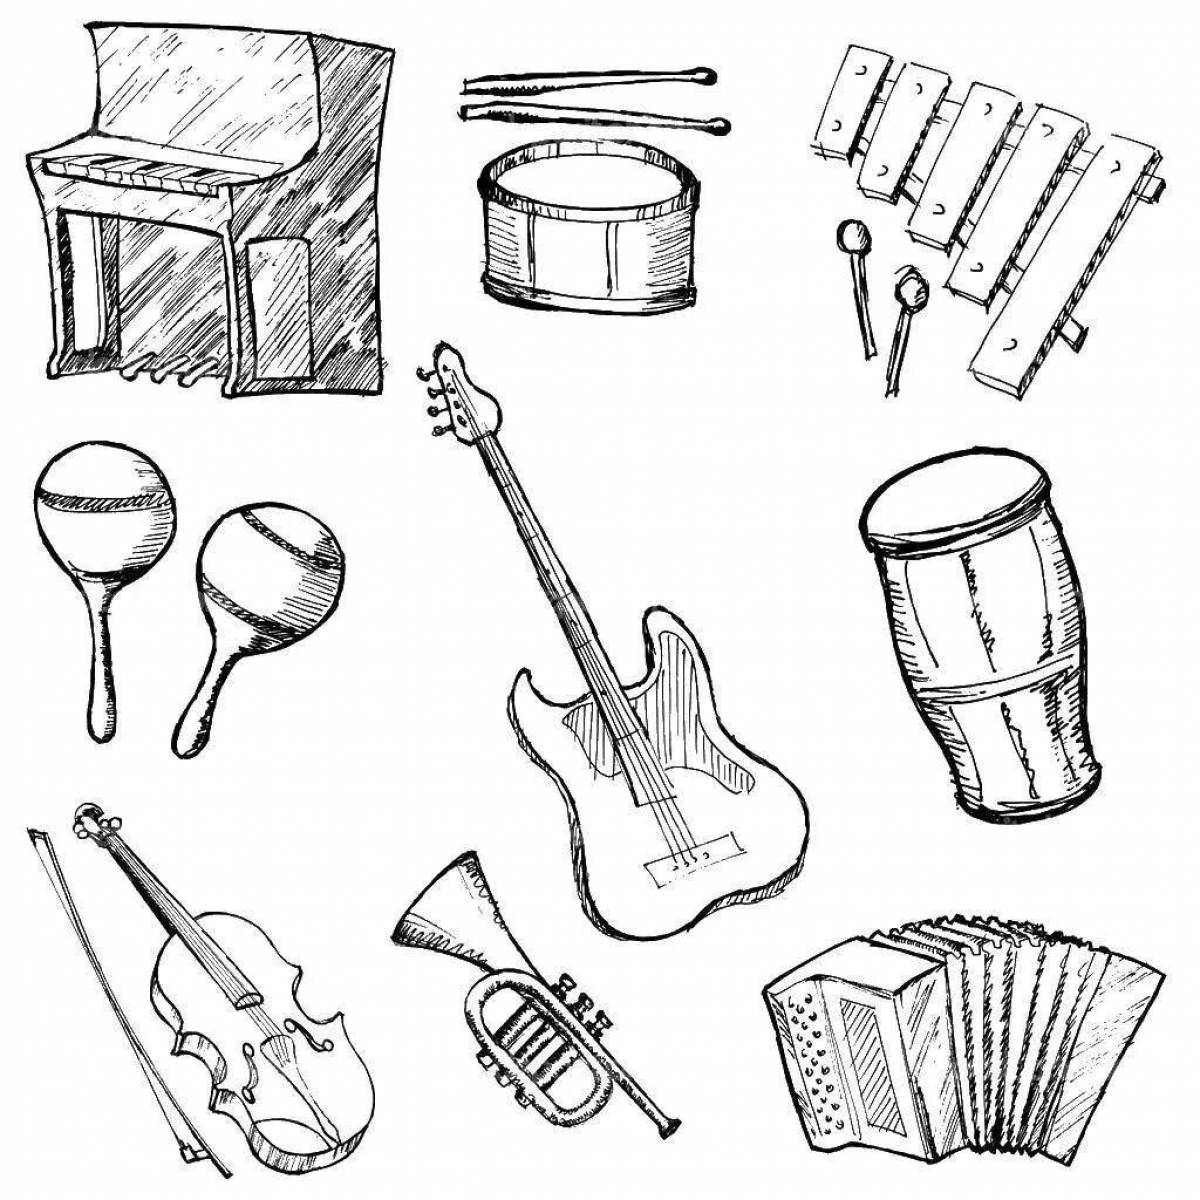 A fun coloring book for Russian folk instruments for kids